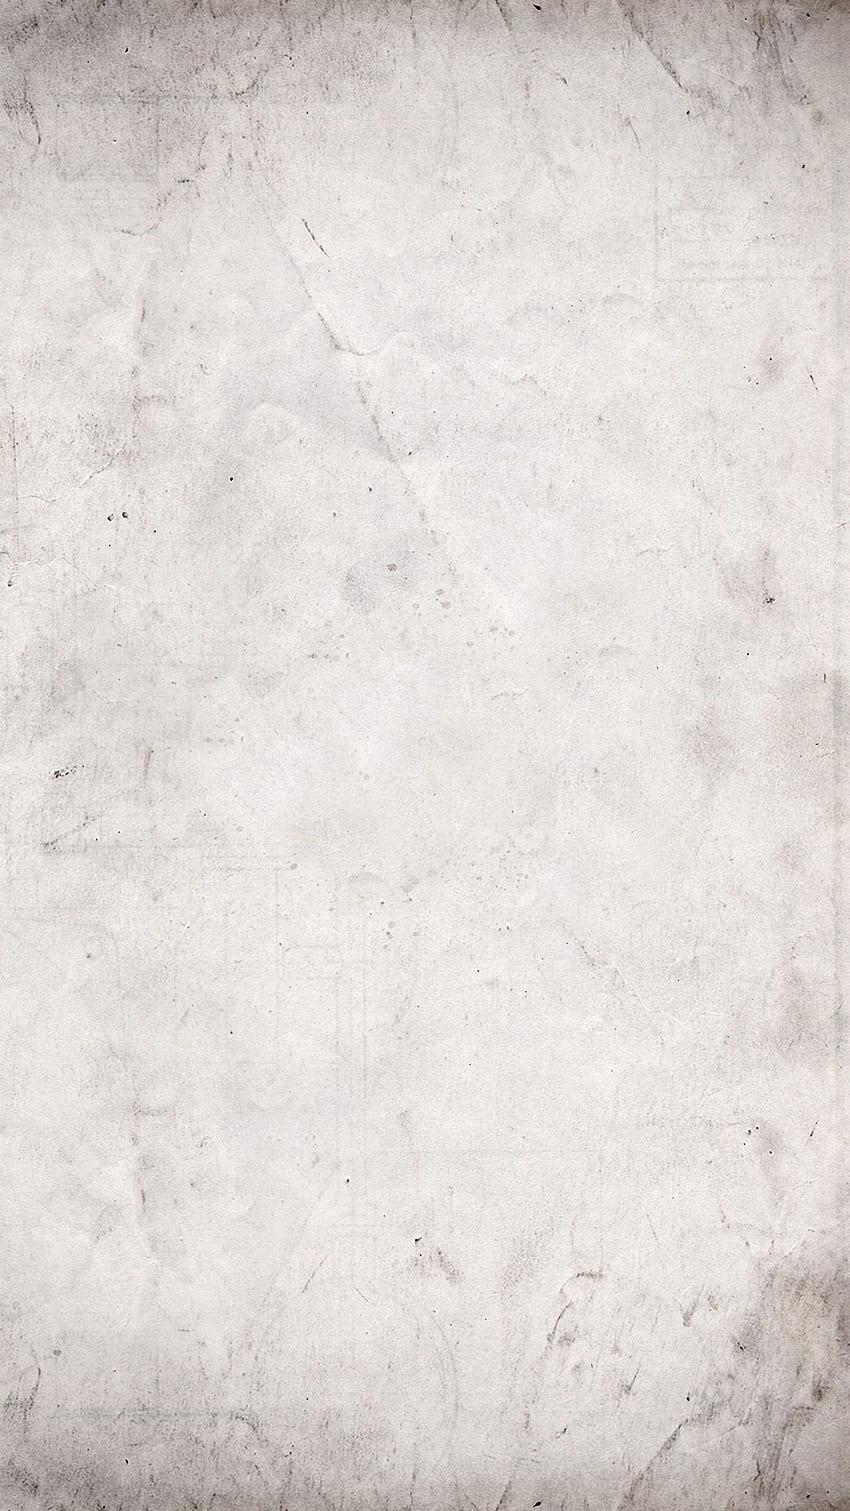 Yellowing Of The Old Paper lg g3 HD phone wallpaper